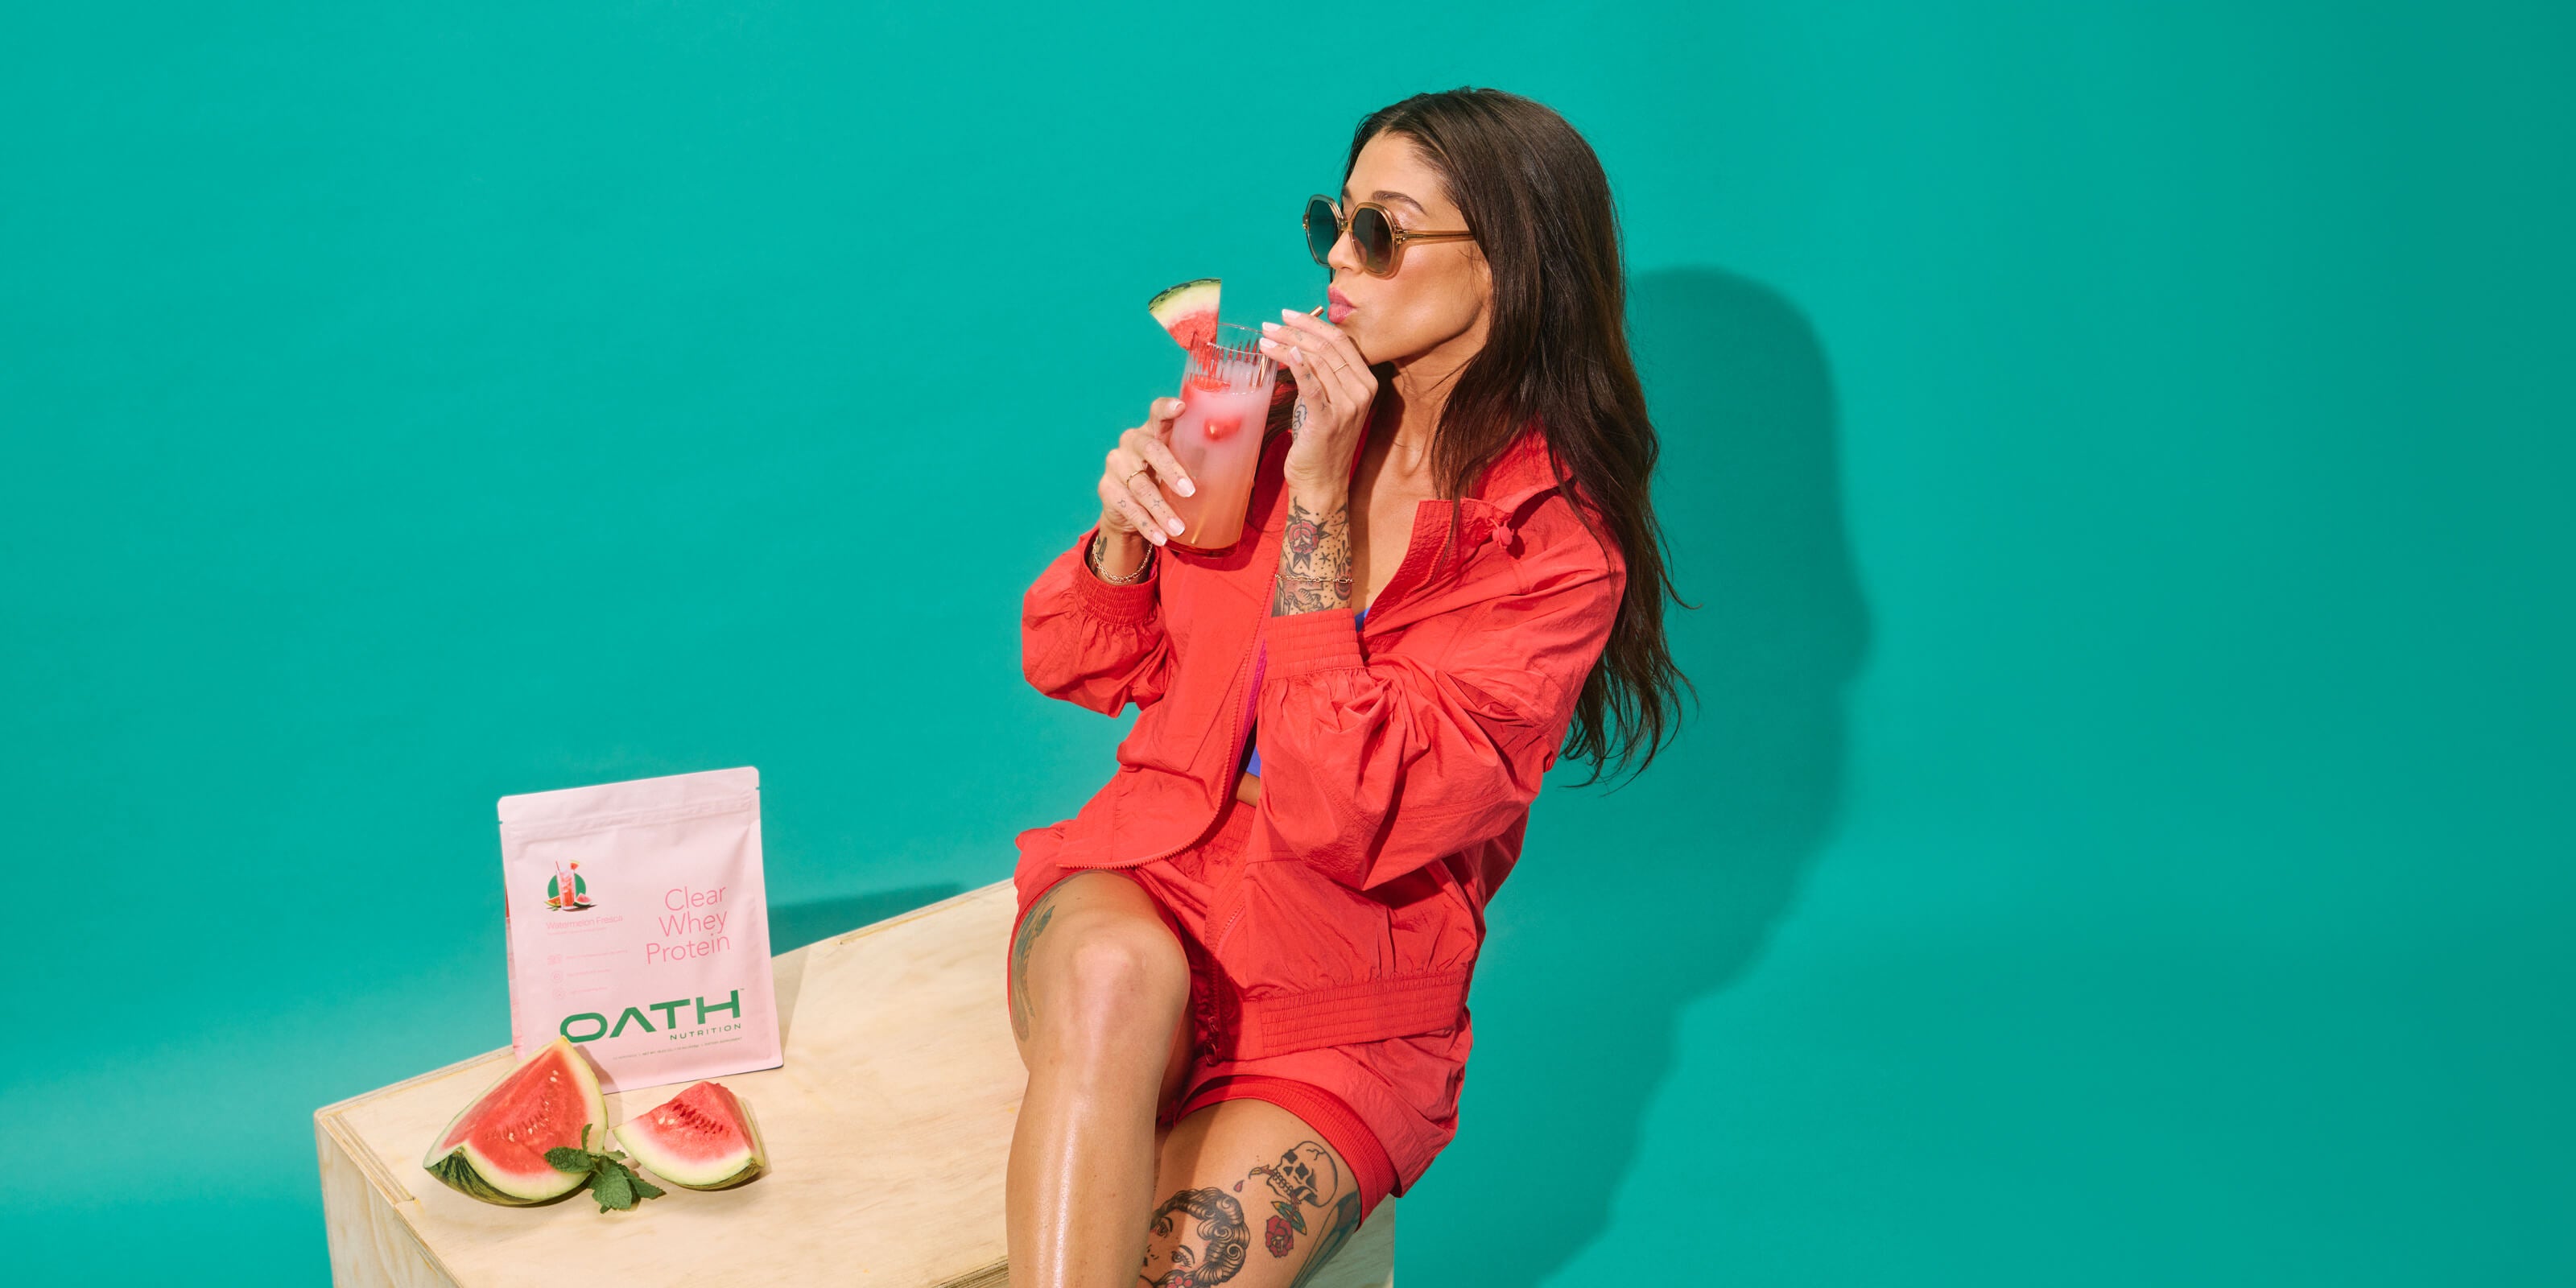 Cool girl drinking delicious Oath Clear Whey Protein - Watermelon Fresca